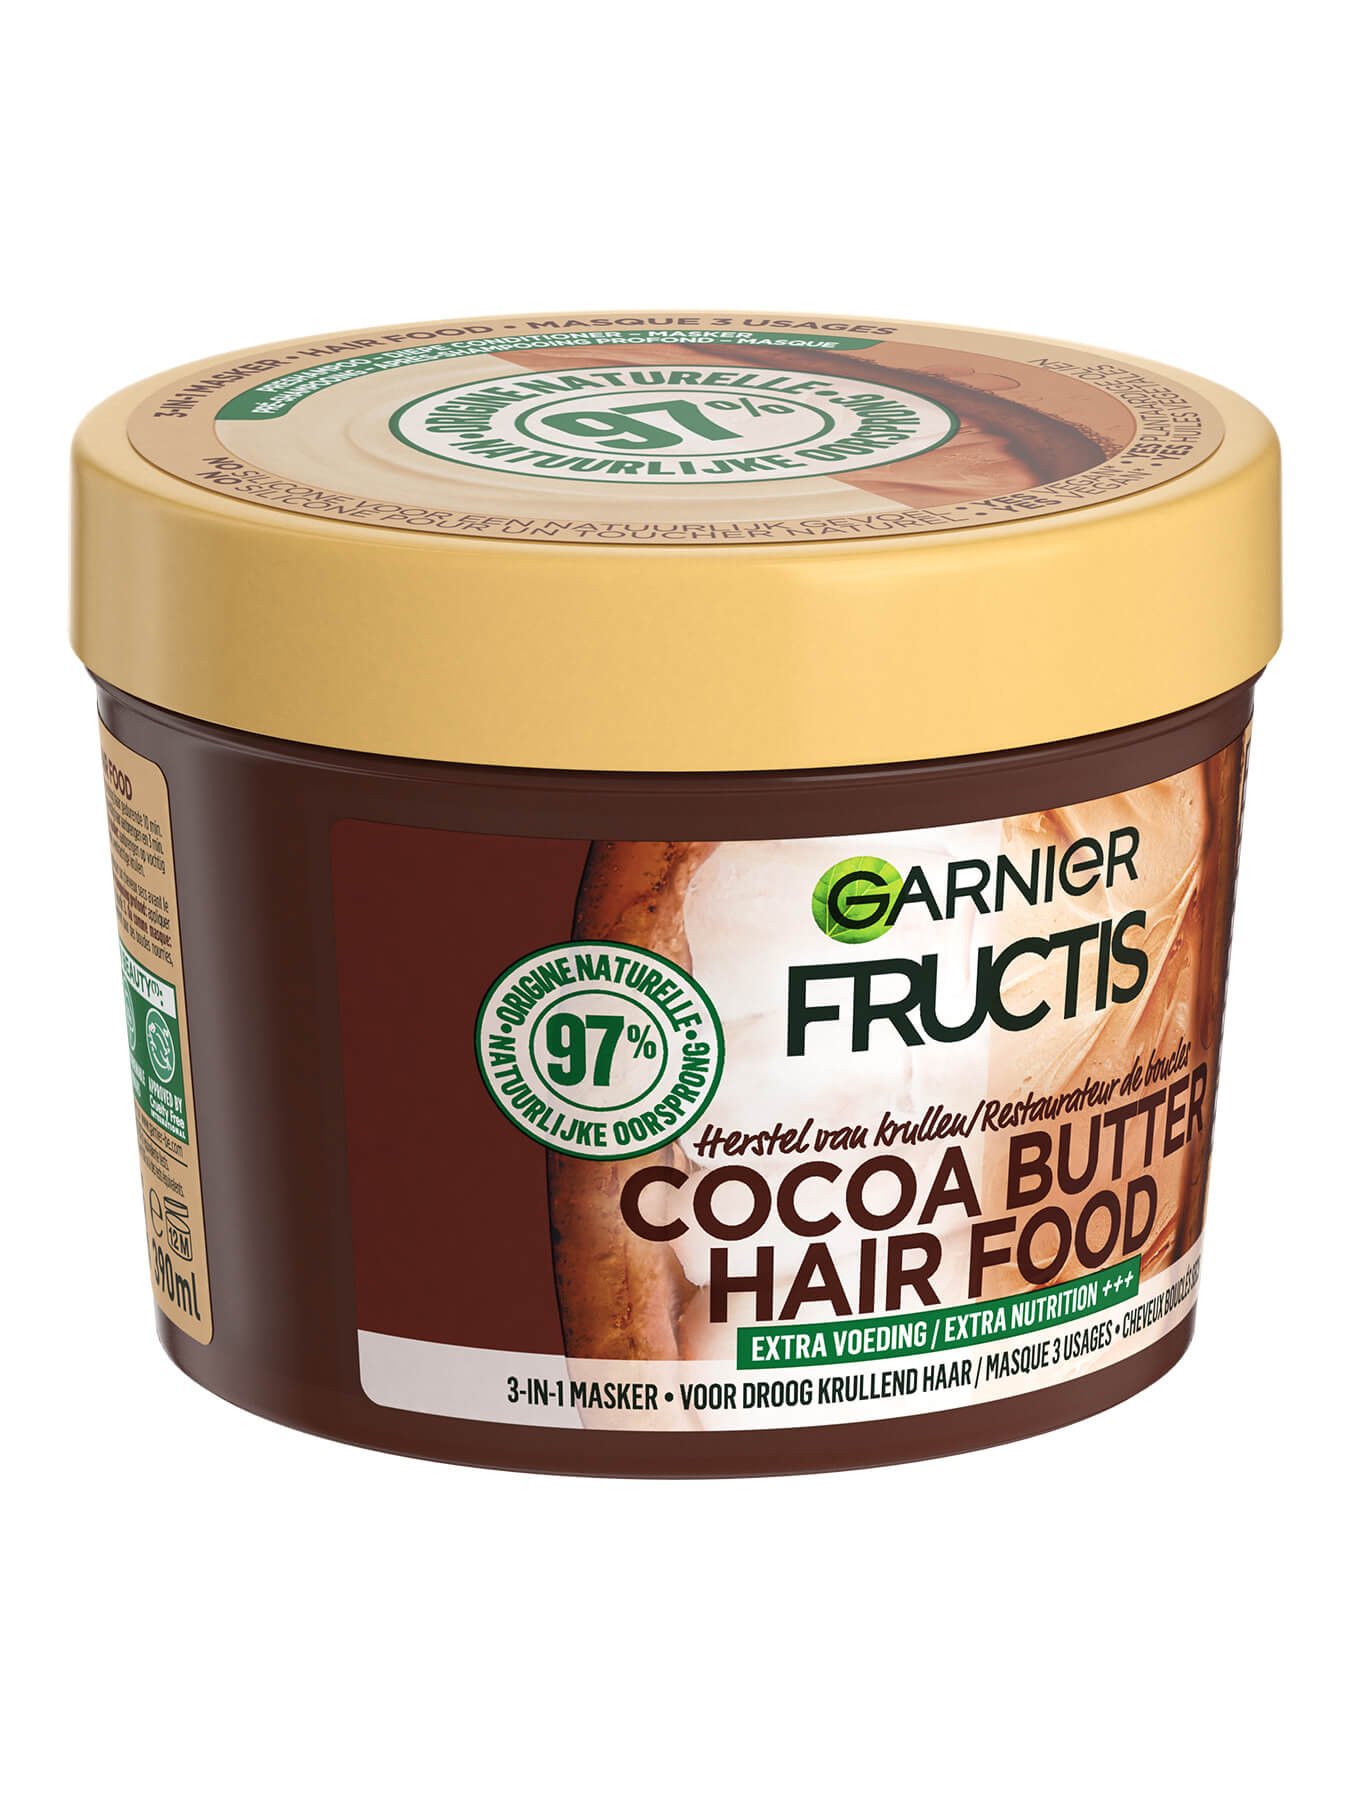 3600542444521 Fructis Hair Food Cocoa Butter PDP 1350x1800pxjpg